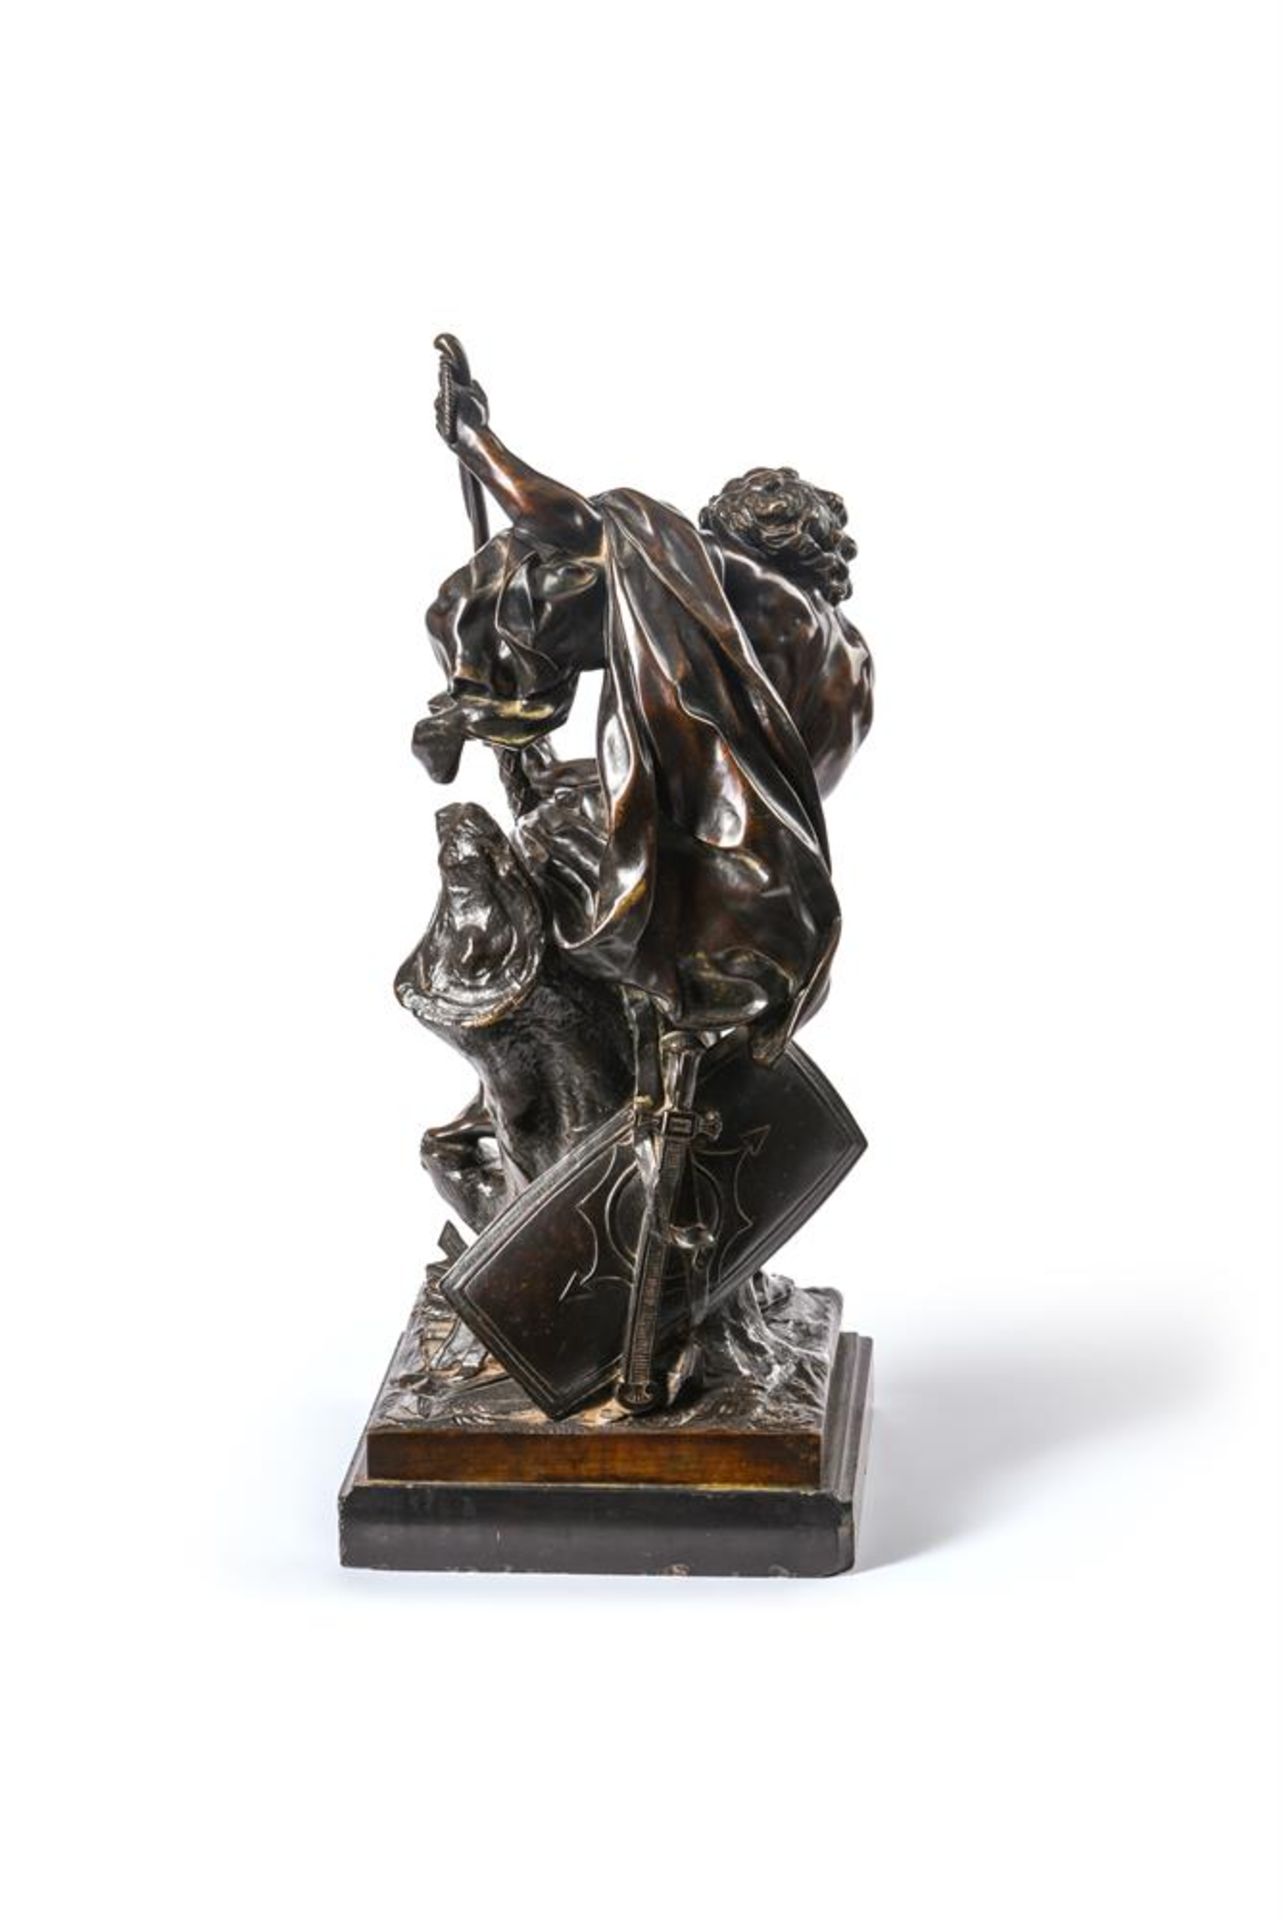 AFTER JACQUES BOUSSEAU (1681-1740), A BRONZE FIGURE OF ULYSSES STRINGING HIS BOW, LATE 19TH CENTURY - Image 3 of 3